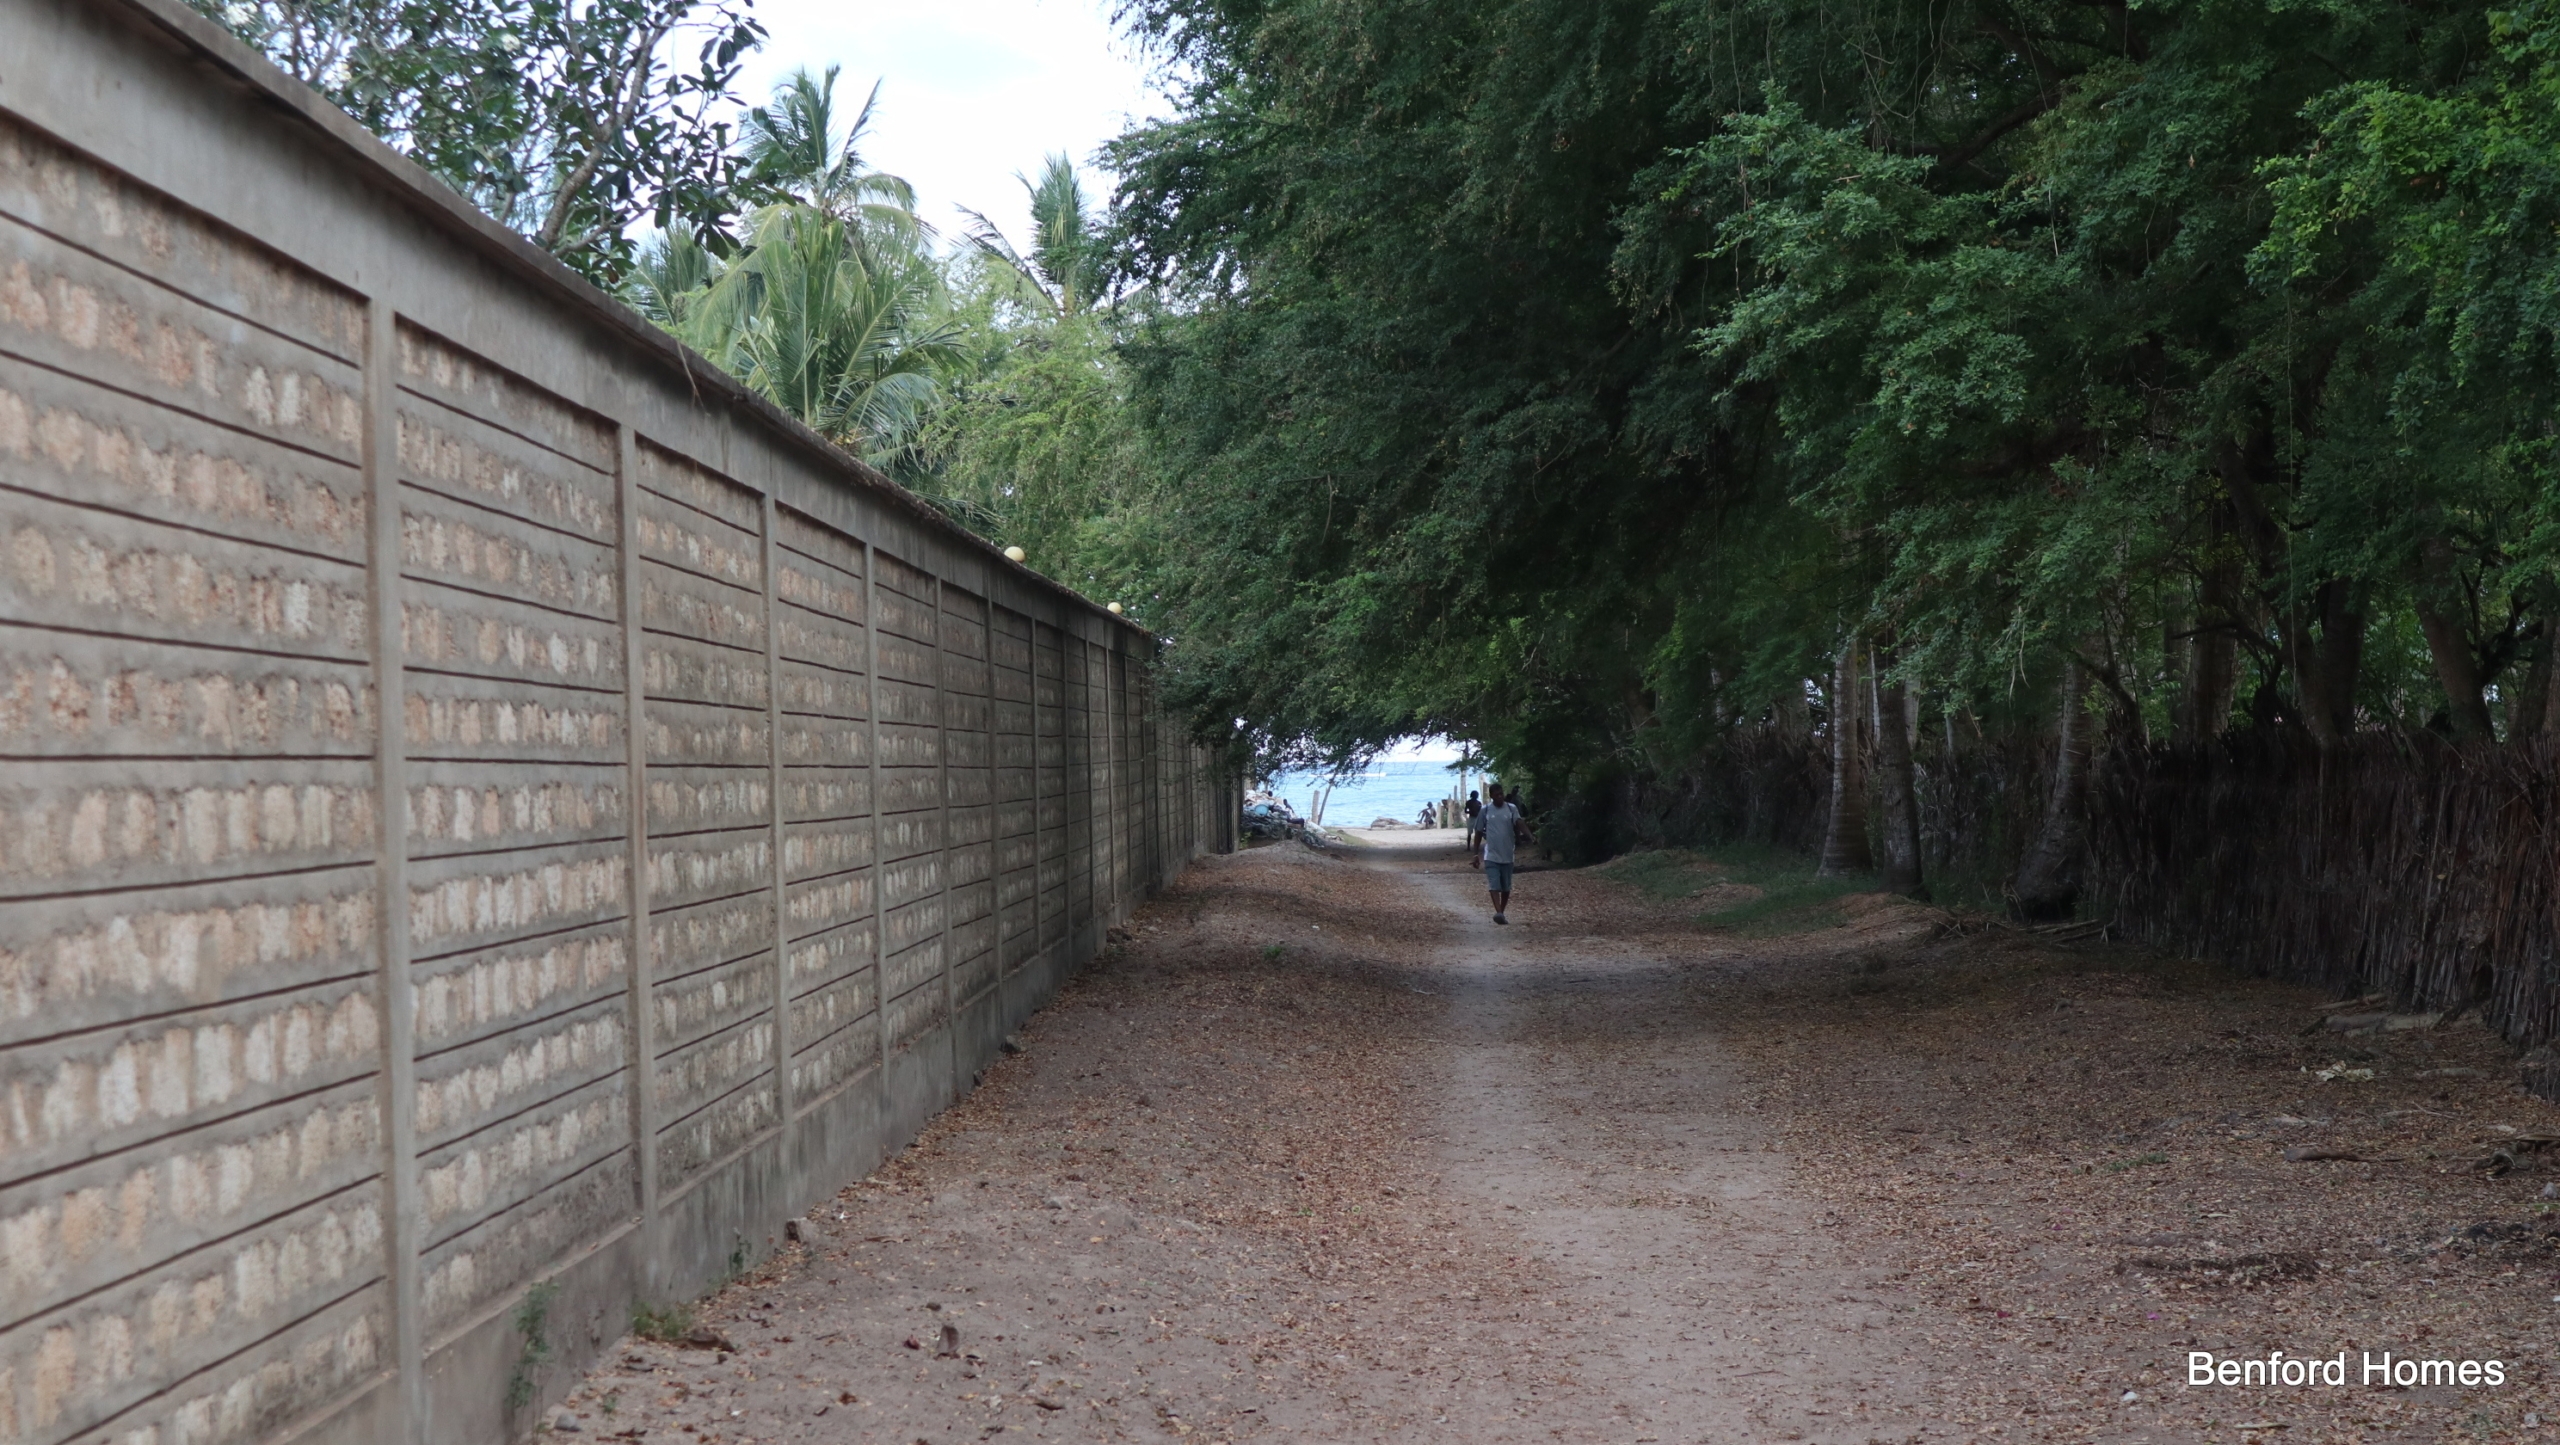 Gentleman of African descent walking on a foot path between a green bush and perimeter wall | Benford Homes Land on sale